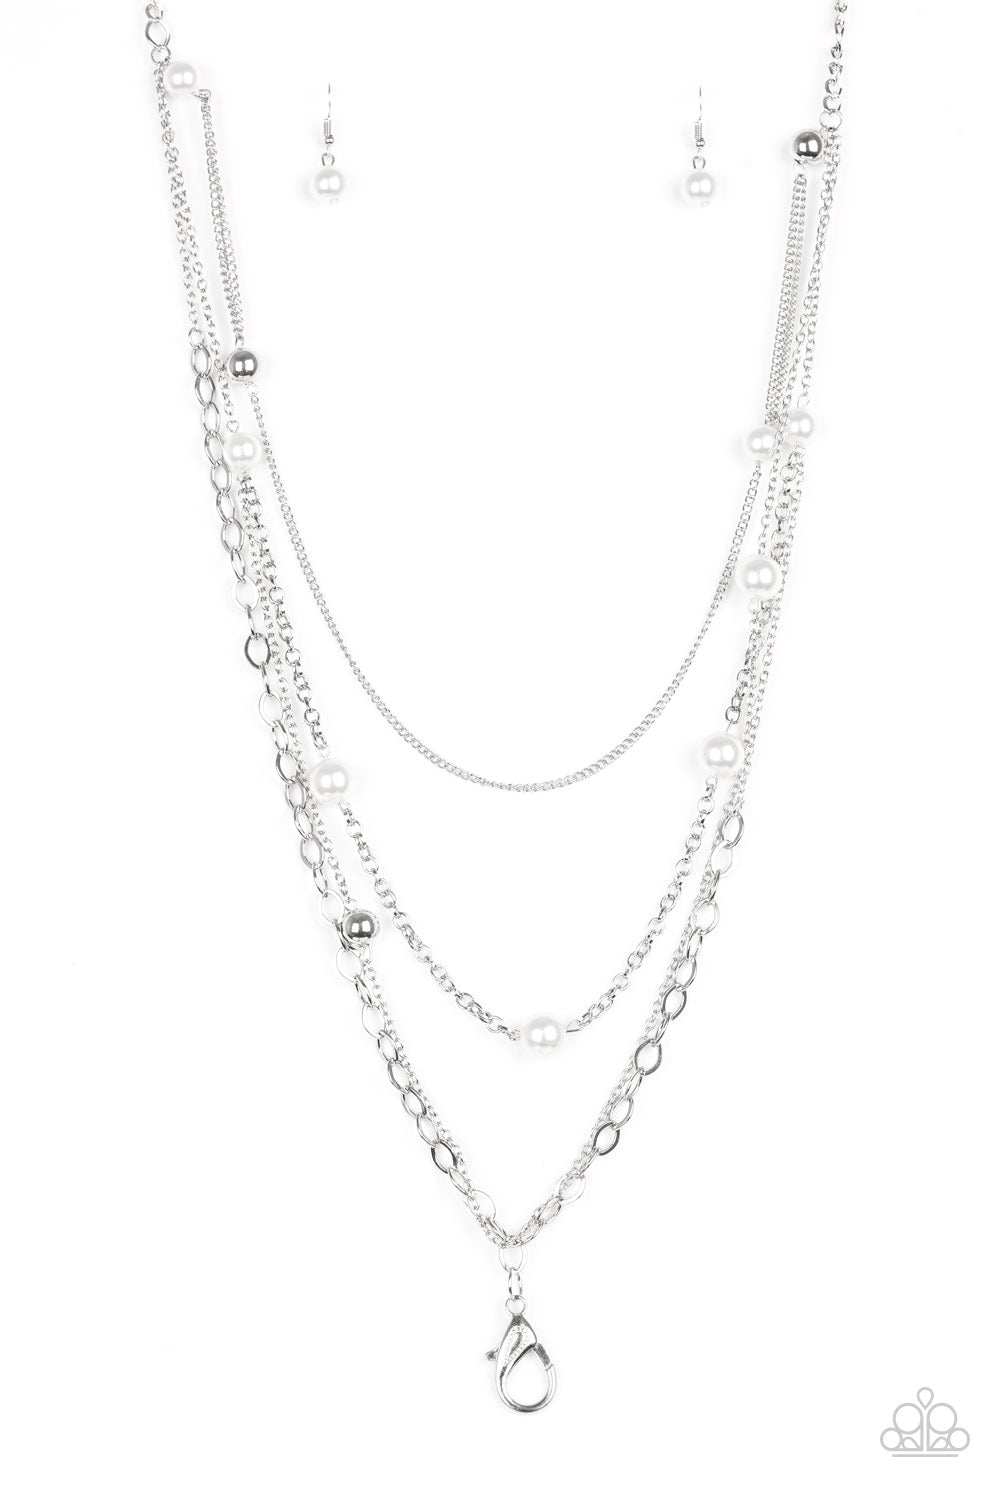 Glamour Grotto Lanyard White Necklace